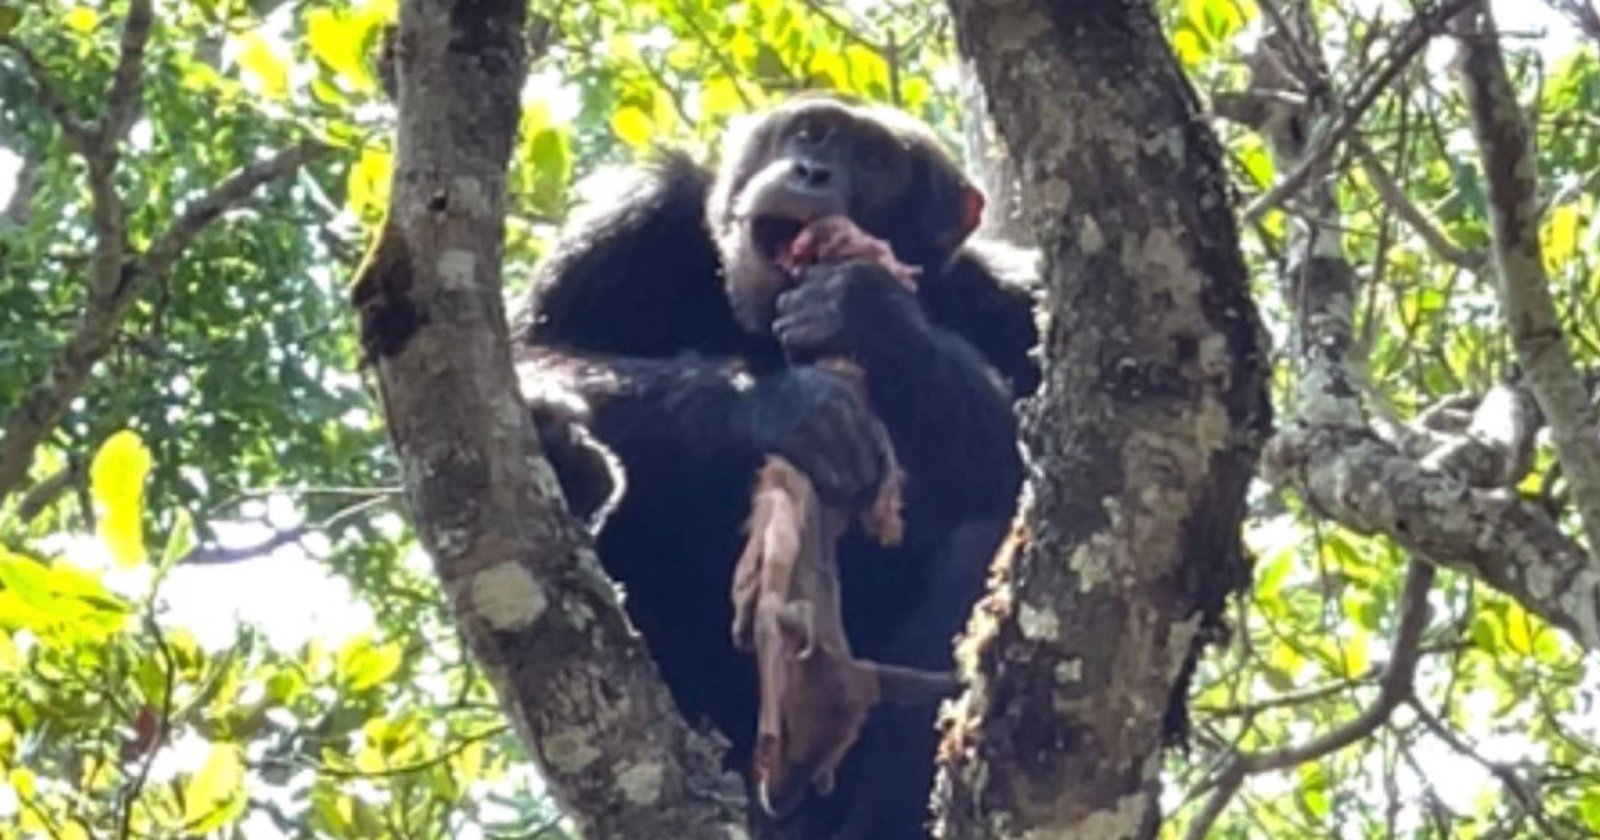  chimp photographed eating food stole from eagle 